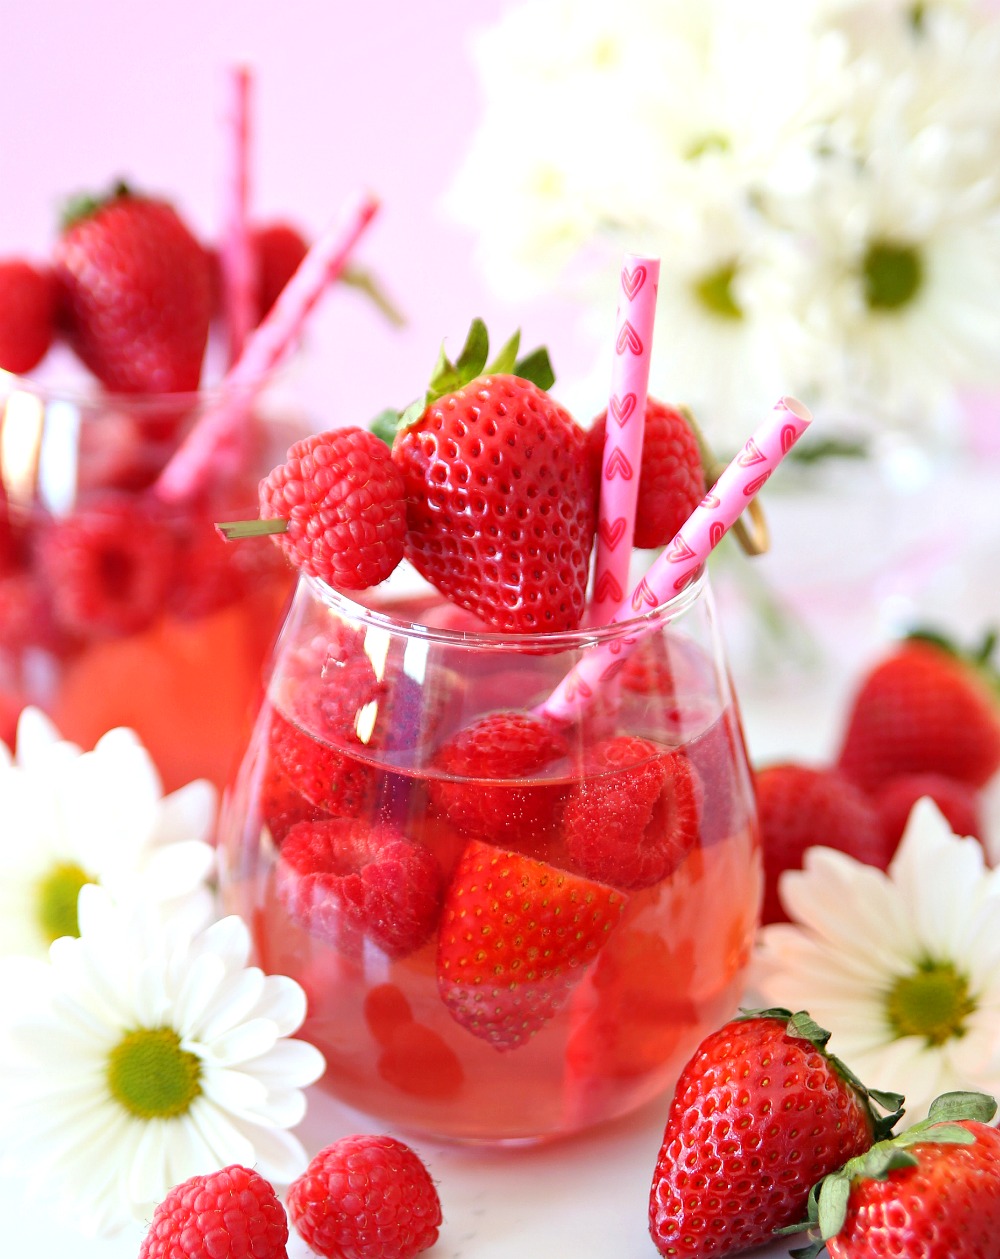 Pink Moscato Sangria